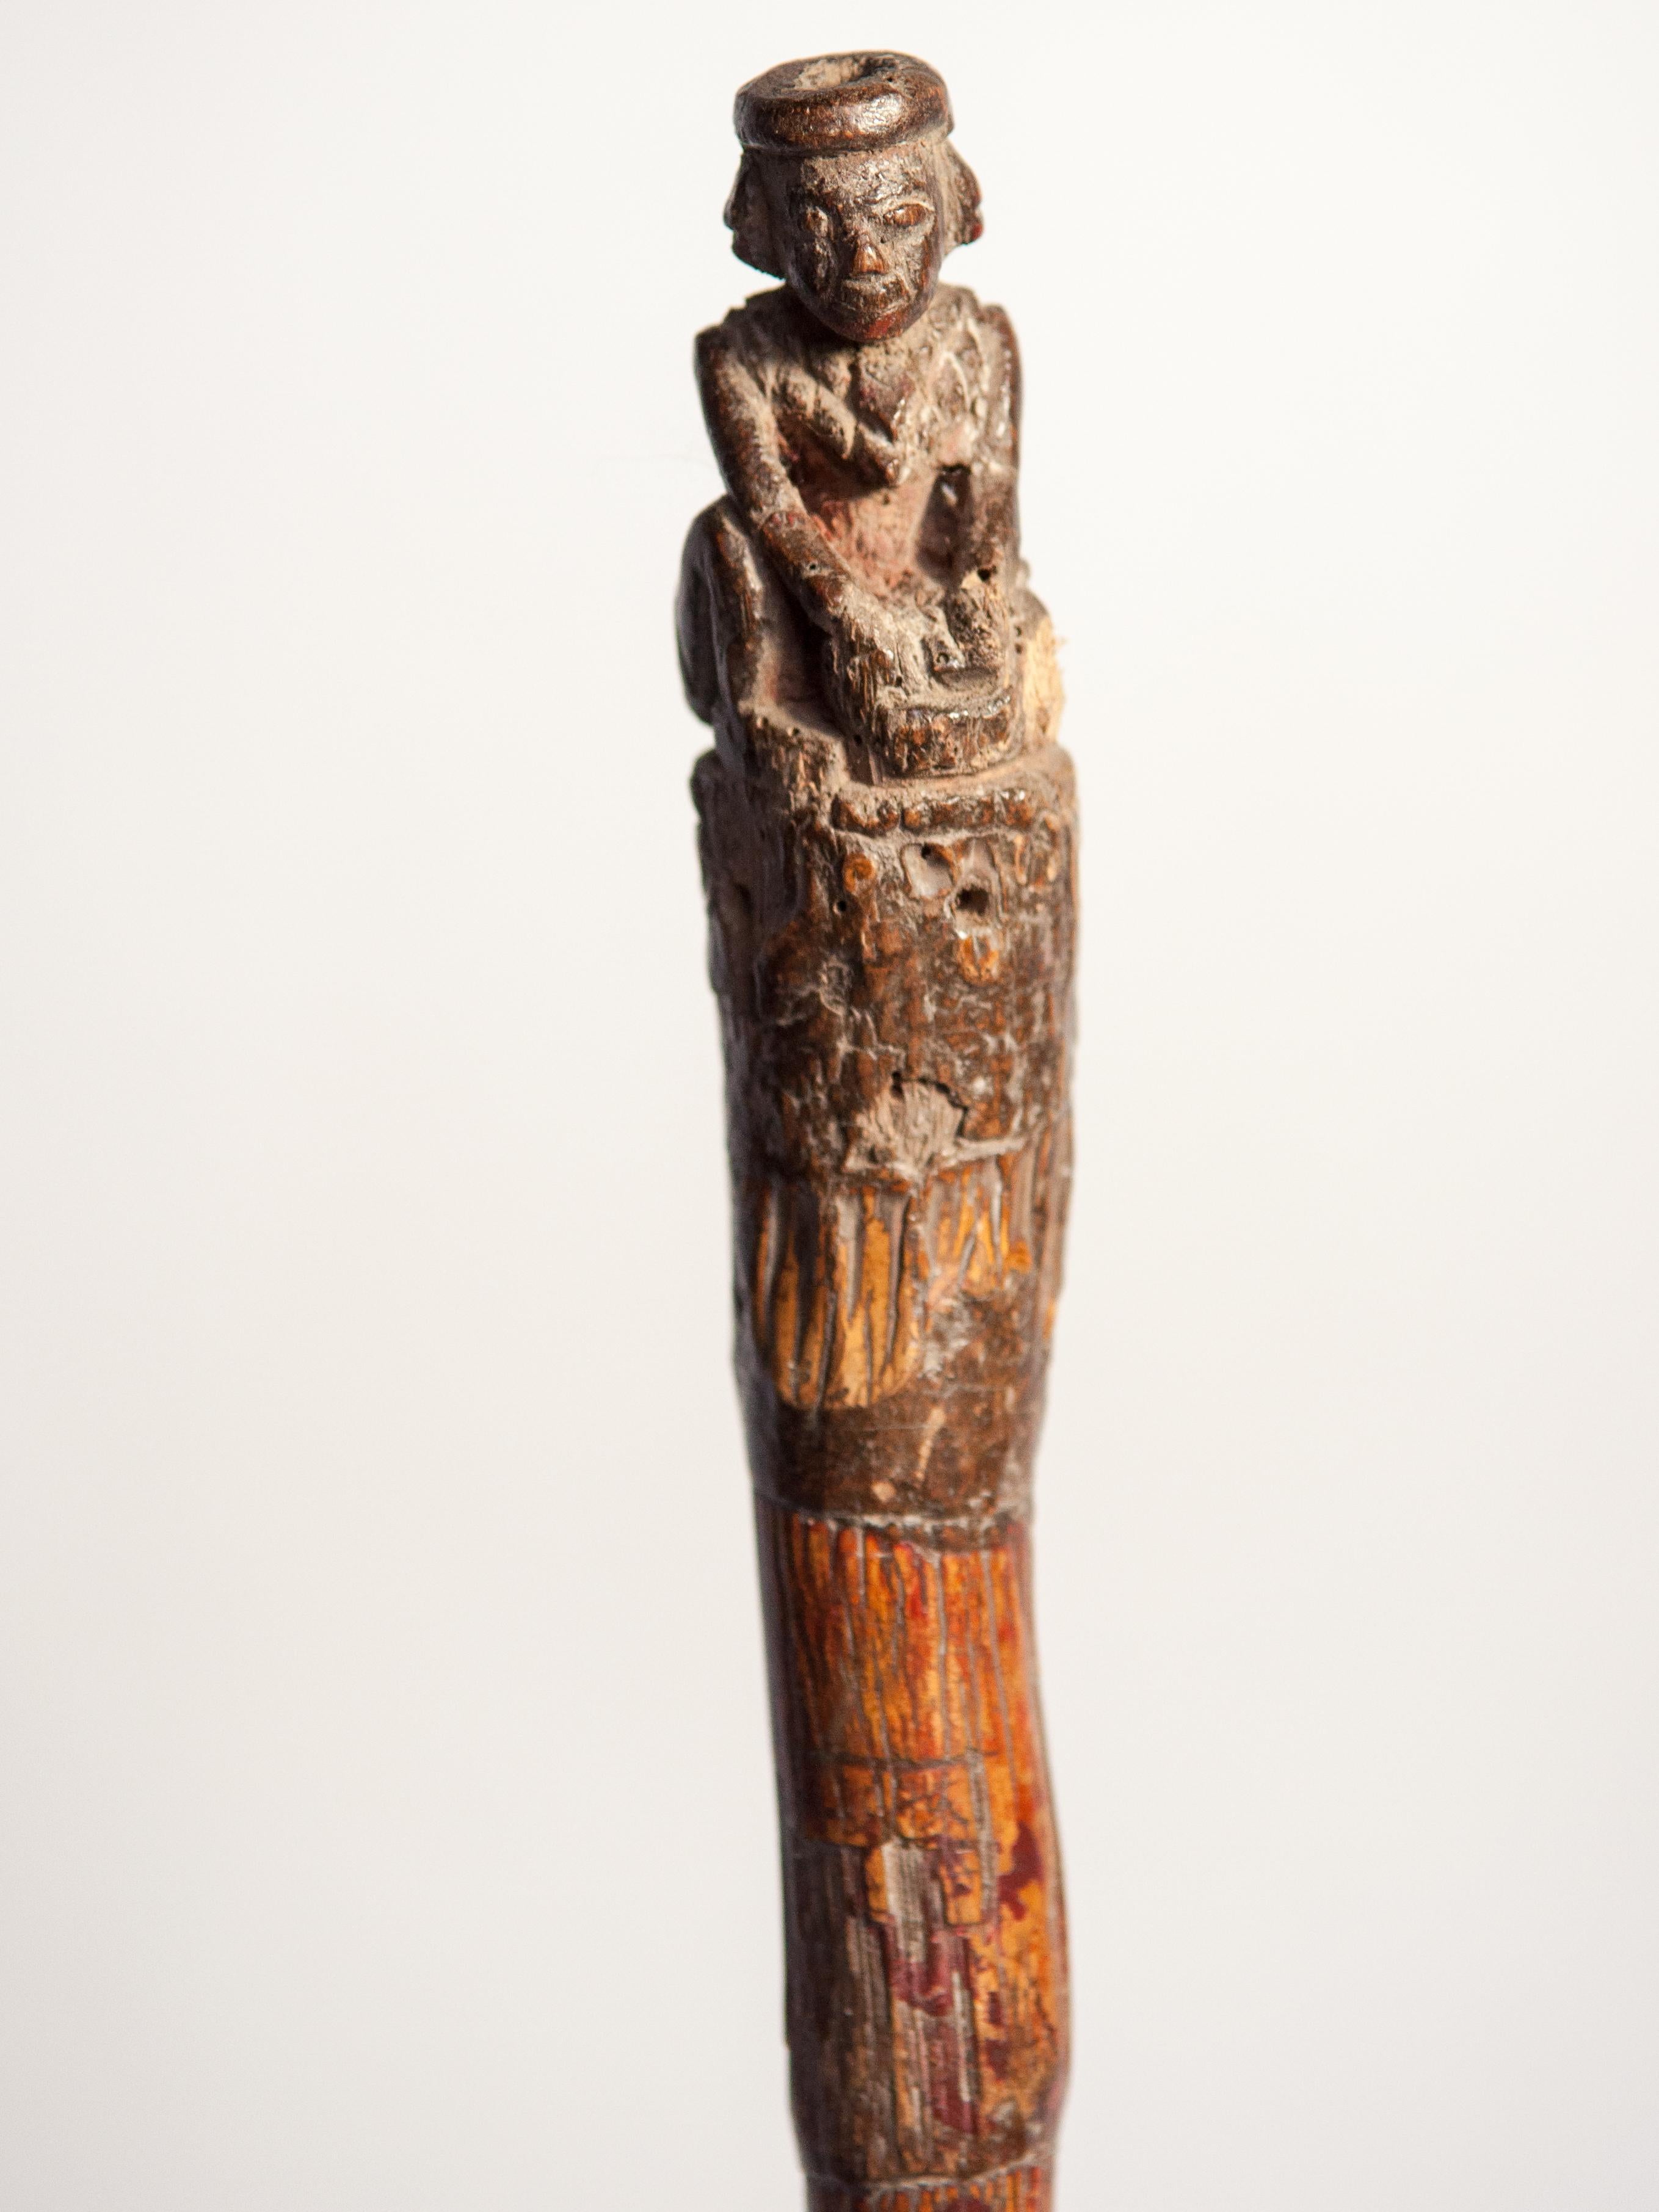 Burmese Vintage Walking Stick with Carved Figure, from Burma, Bamboo, Early 20th Century